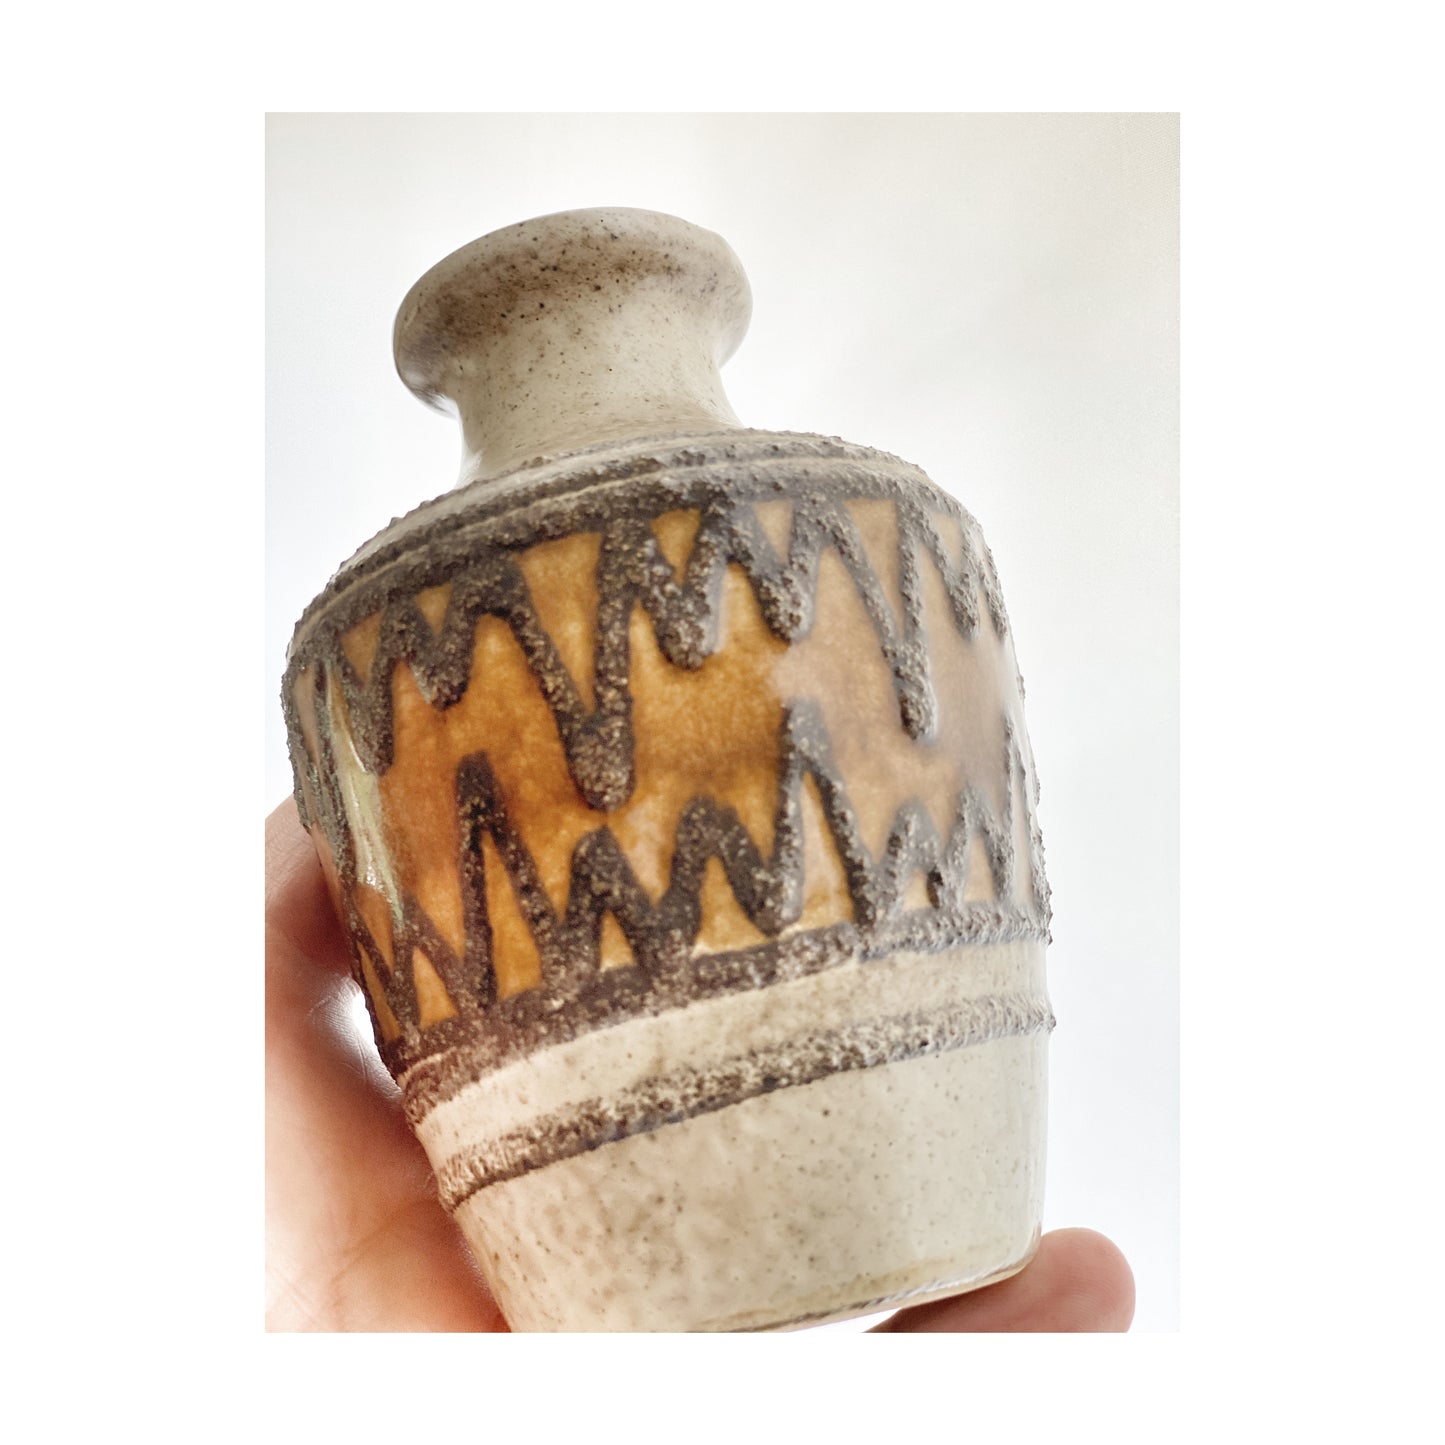 East German Ceramic Vase / Urn with Sgraffito *** -15% discount offer available